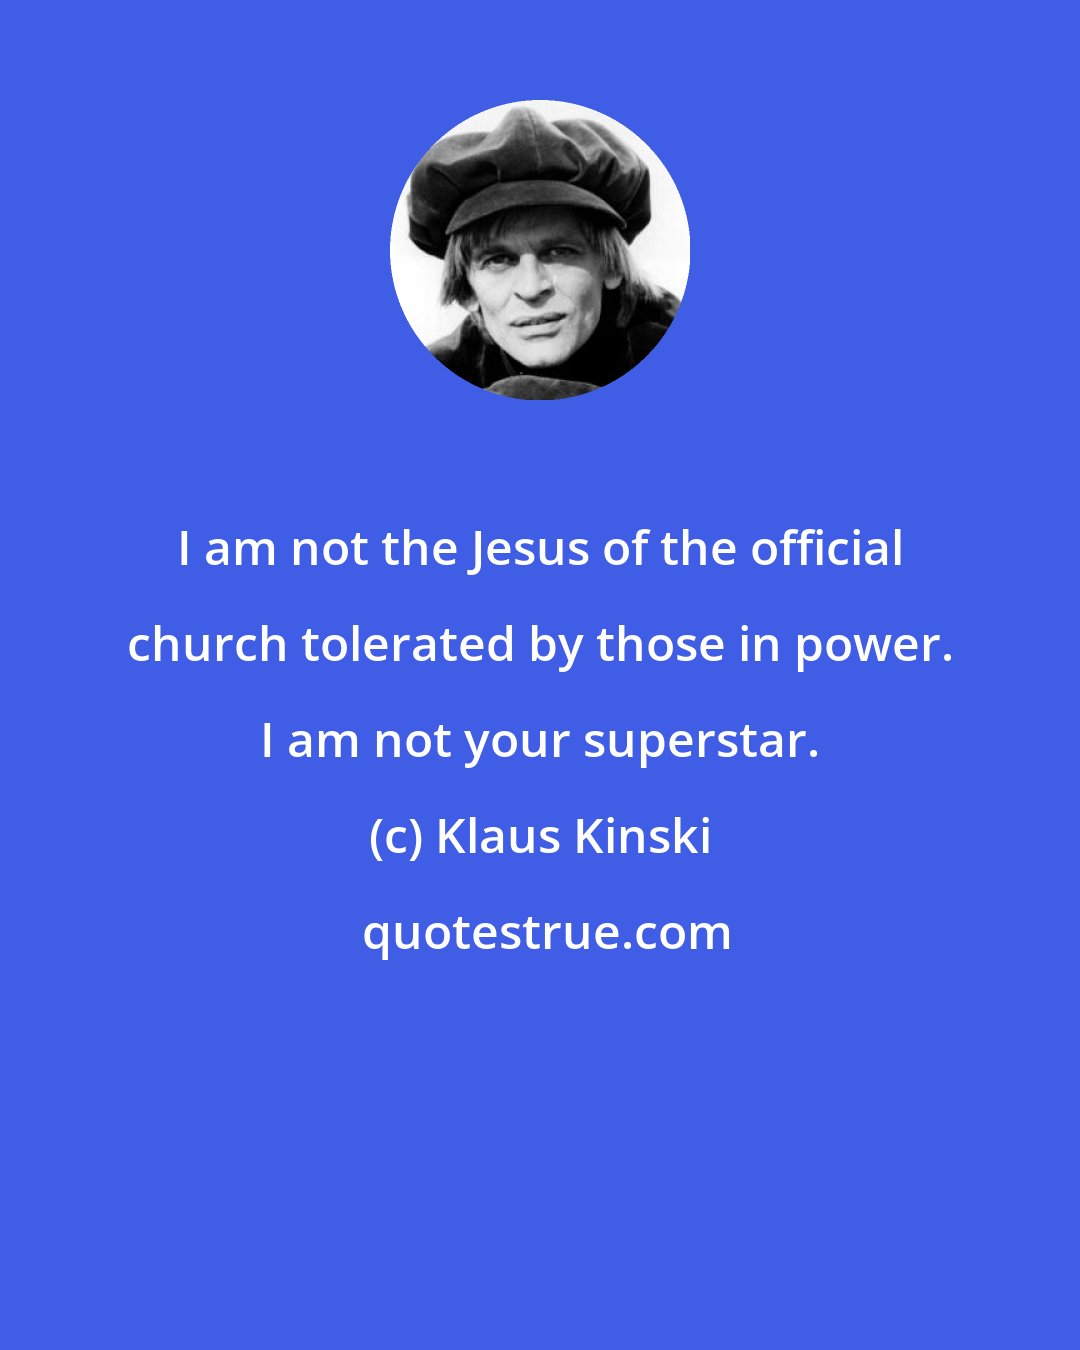 Klaus Kinski: I am not the Jesus of the official church tolerated by those in power. I am not your superstar.